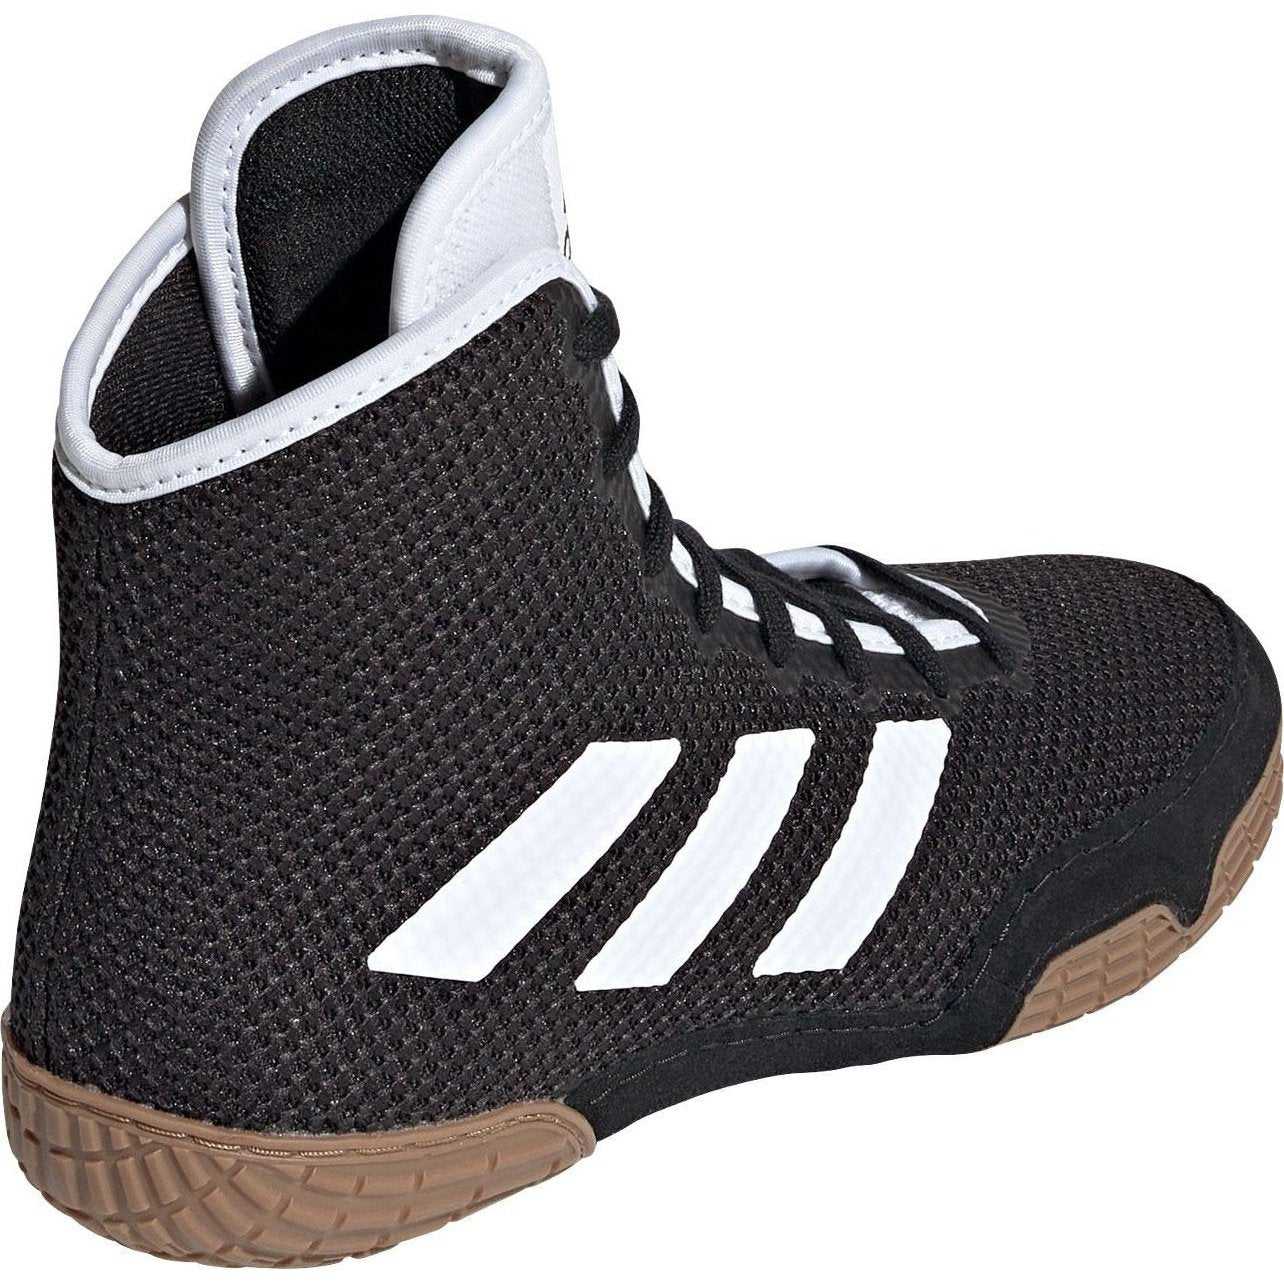 Adidas Tech Fall 2.0 Youth Wrestling Shoes - White Black